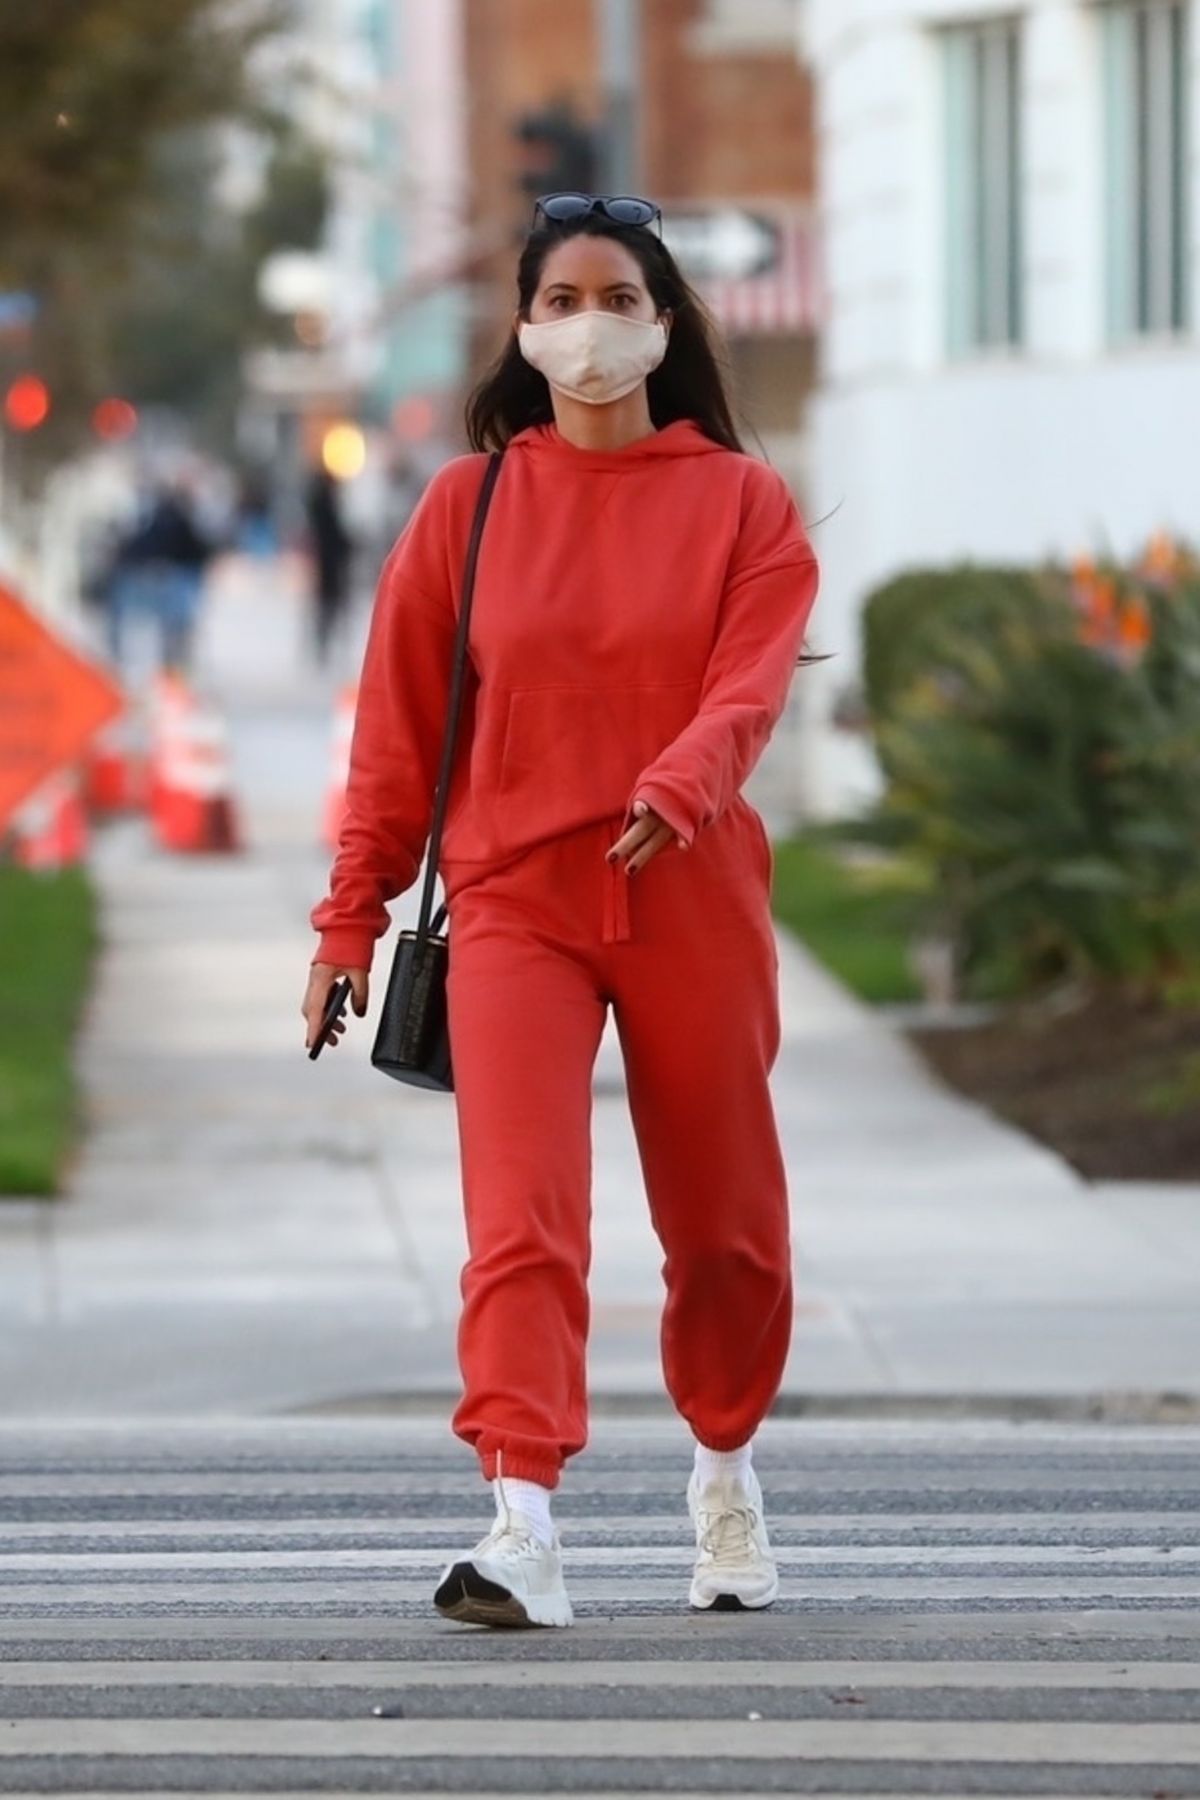 olivia-munn-out-and-about-in-santa-monica-11-24-2020-8.jpg